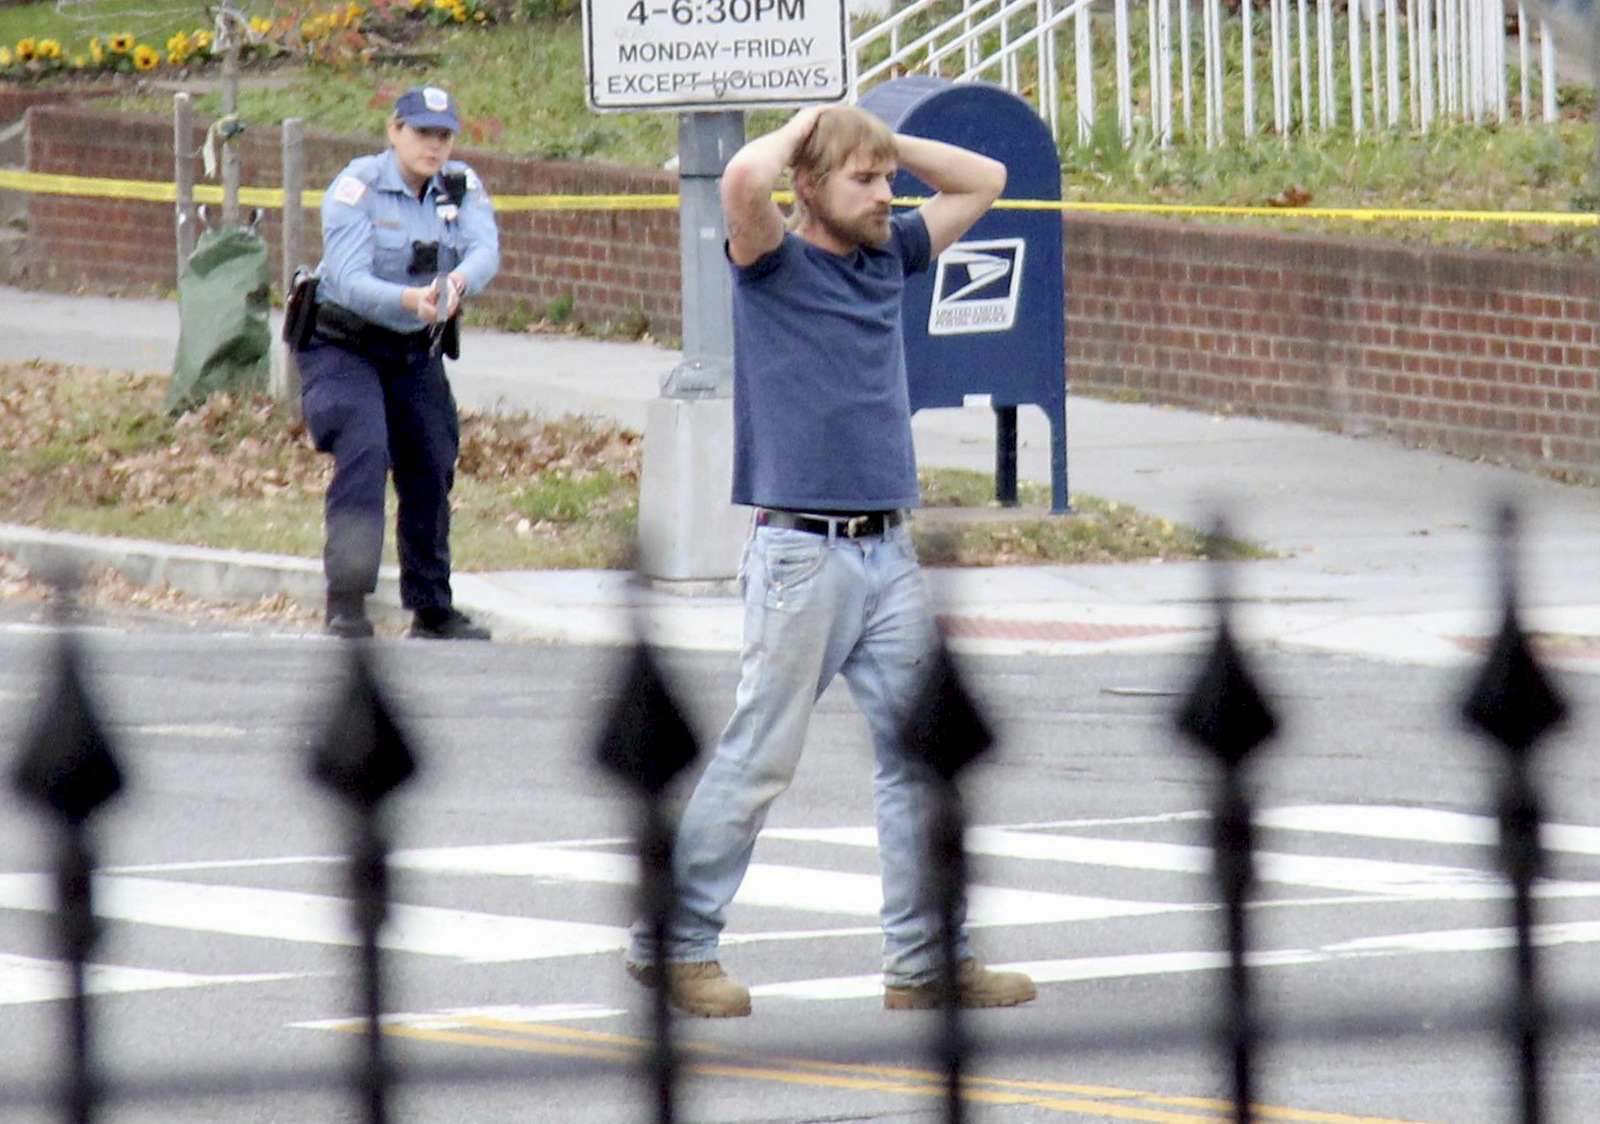 FILE - In this Dec. 4, 2016 file photo, Edgar Maddison Welch, 28 of Salisbury, N.C., surrenders to police in Washington. Welch, a man who police said was inspired by false internet rumors dubbed “pizzagate” to fire an assault weapon inside a Washington pizzeria. March 24, 2017 (Sathi Soma/AP)